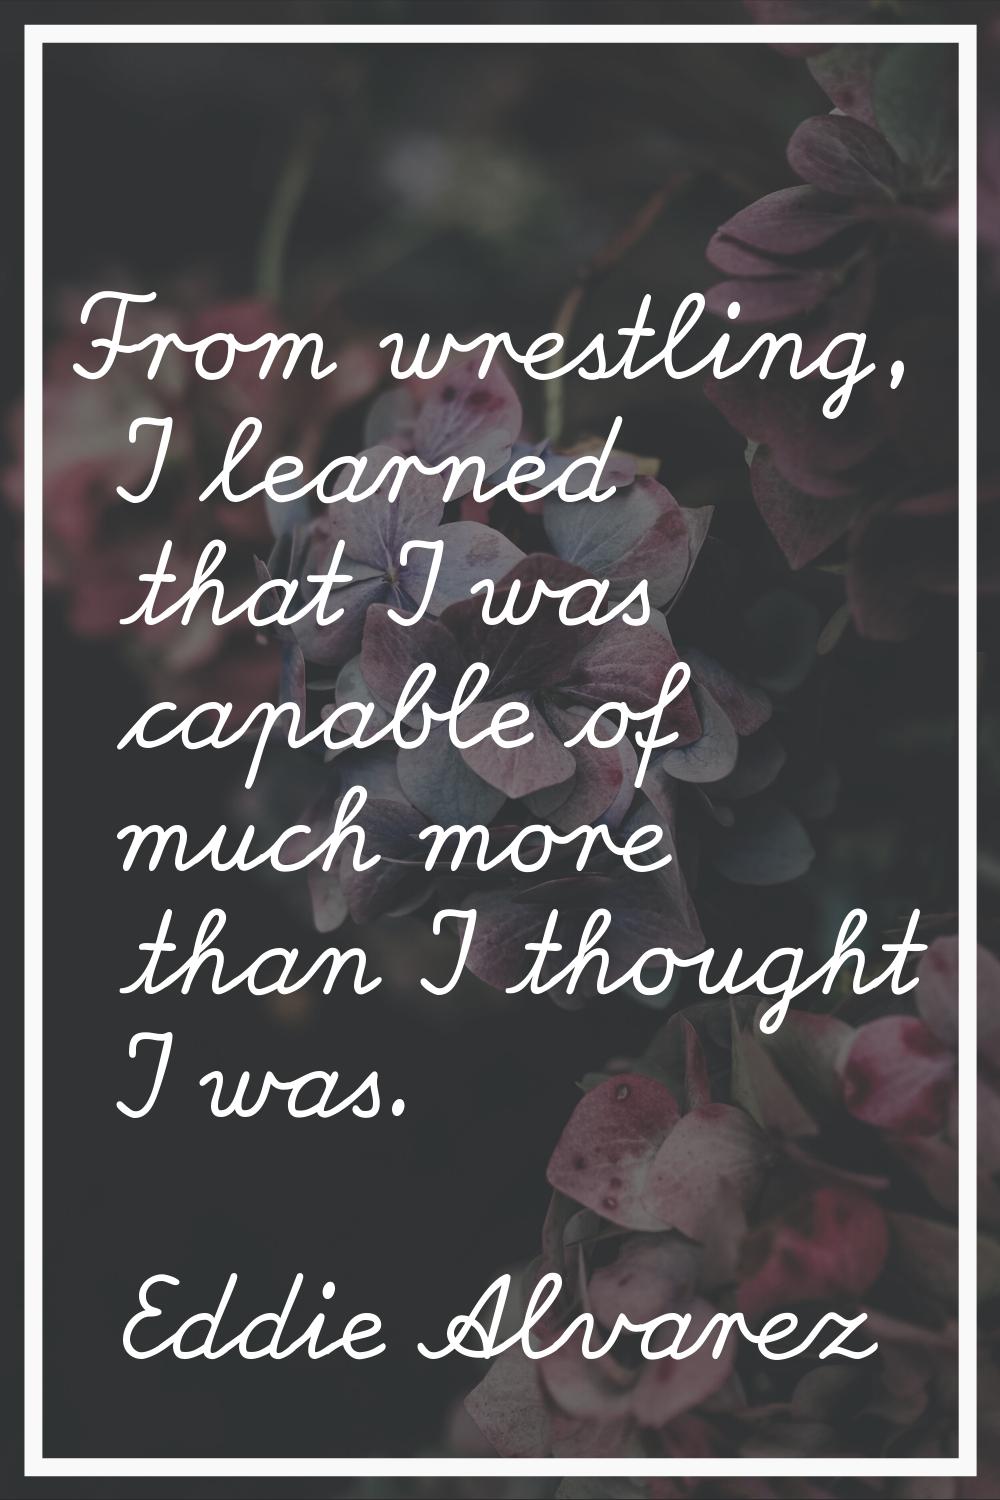 From wrestling, I learned that I was capable of much more than I thought I was.